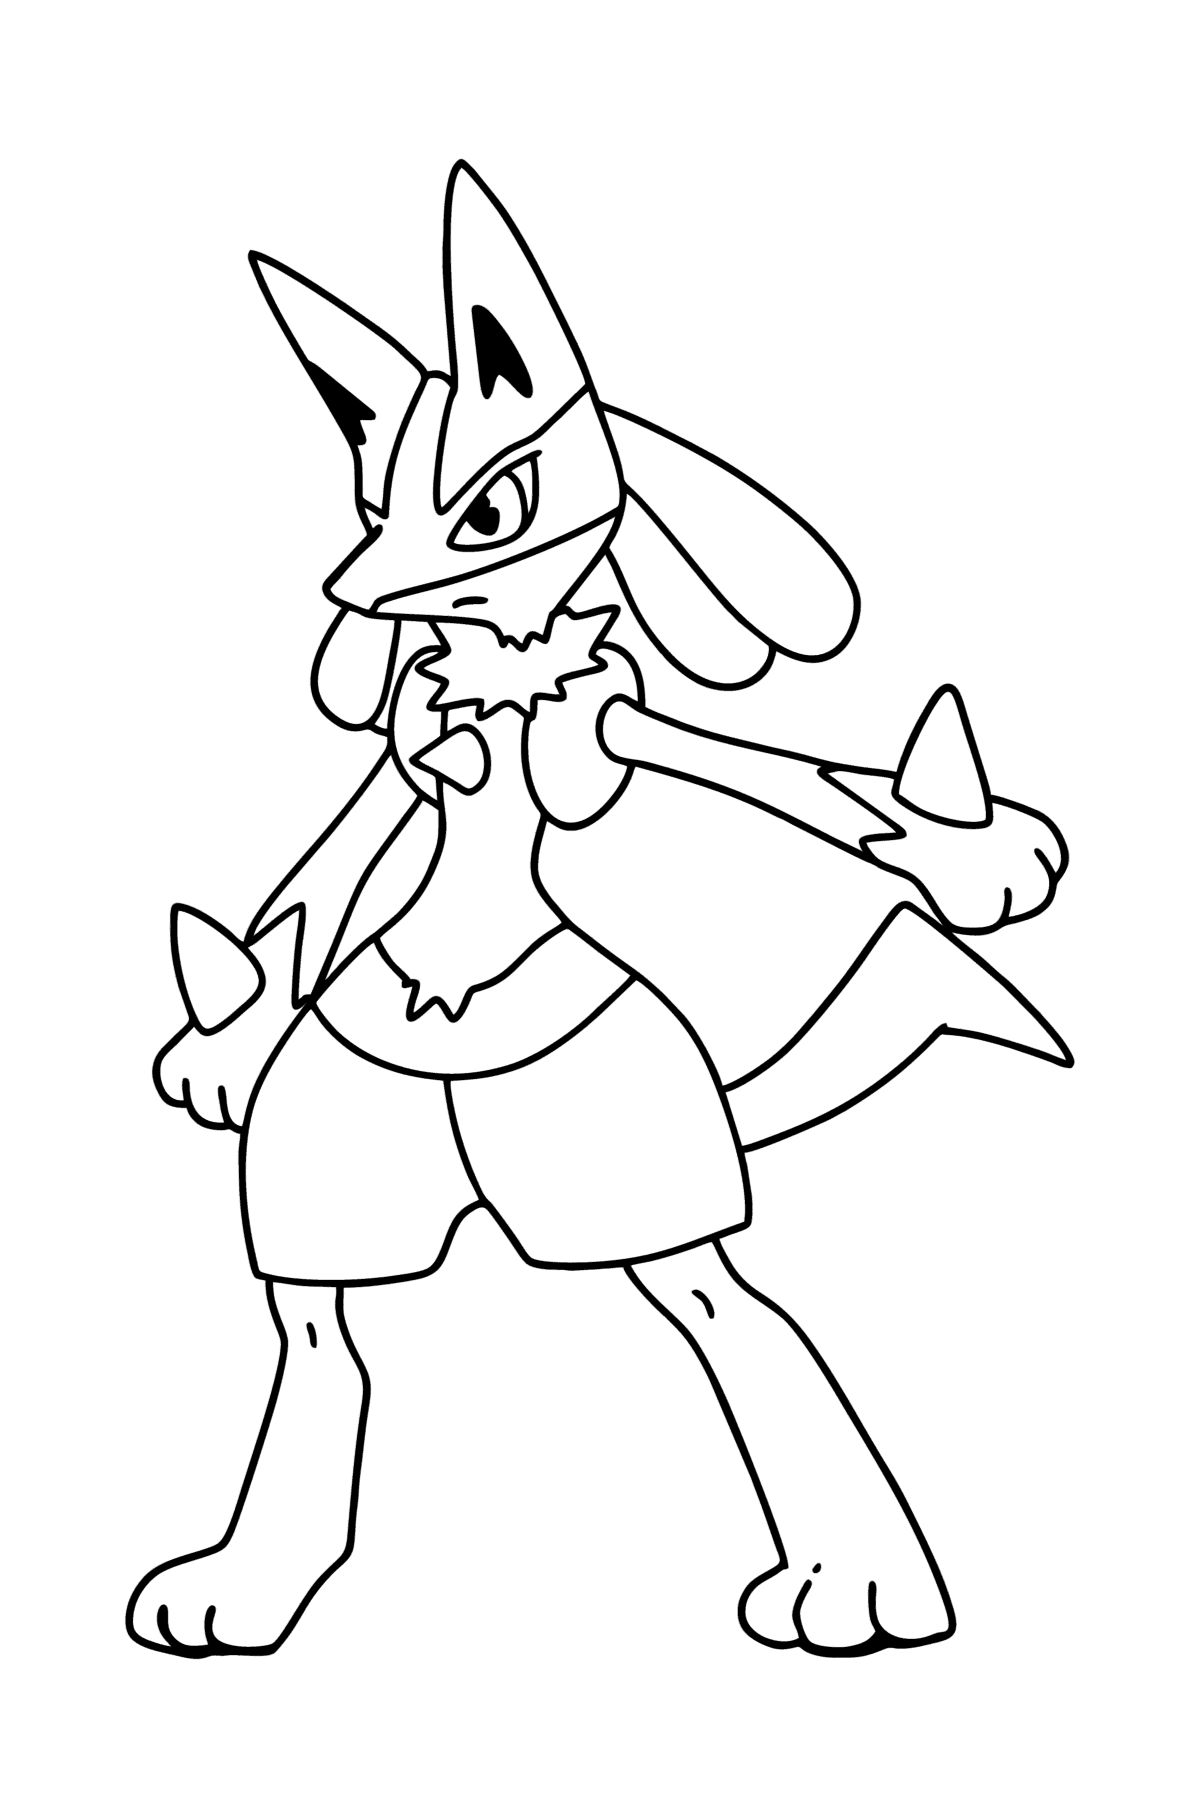 Coloring page Pokemon Go Lucario - Coloring Pages for Kids